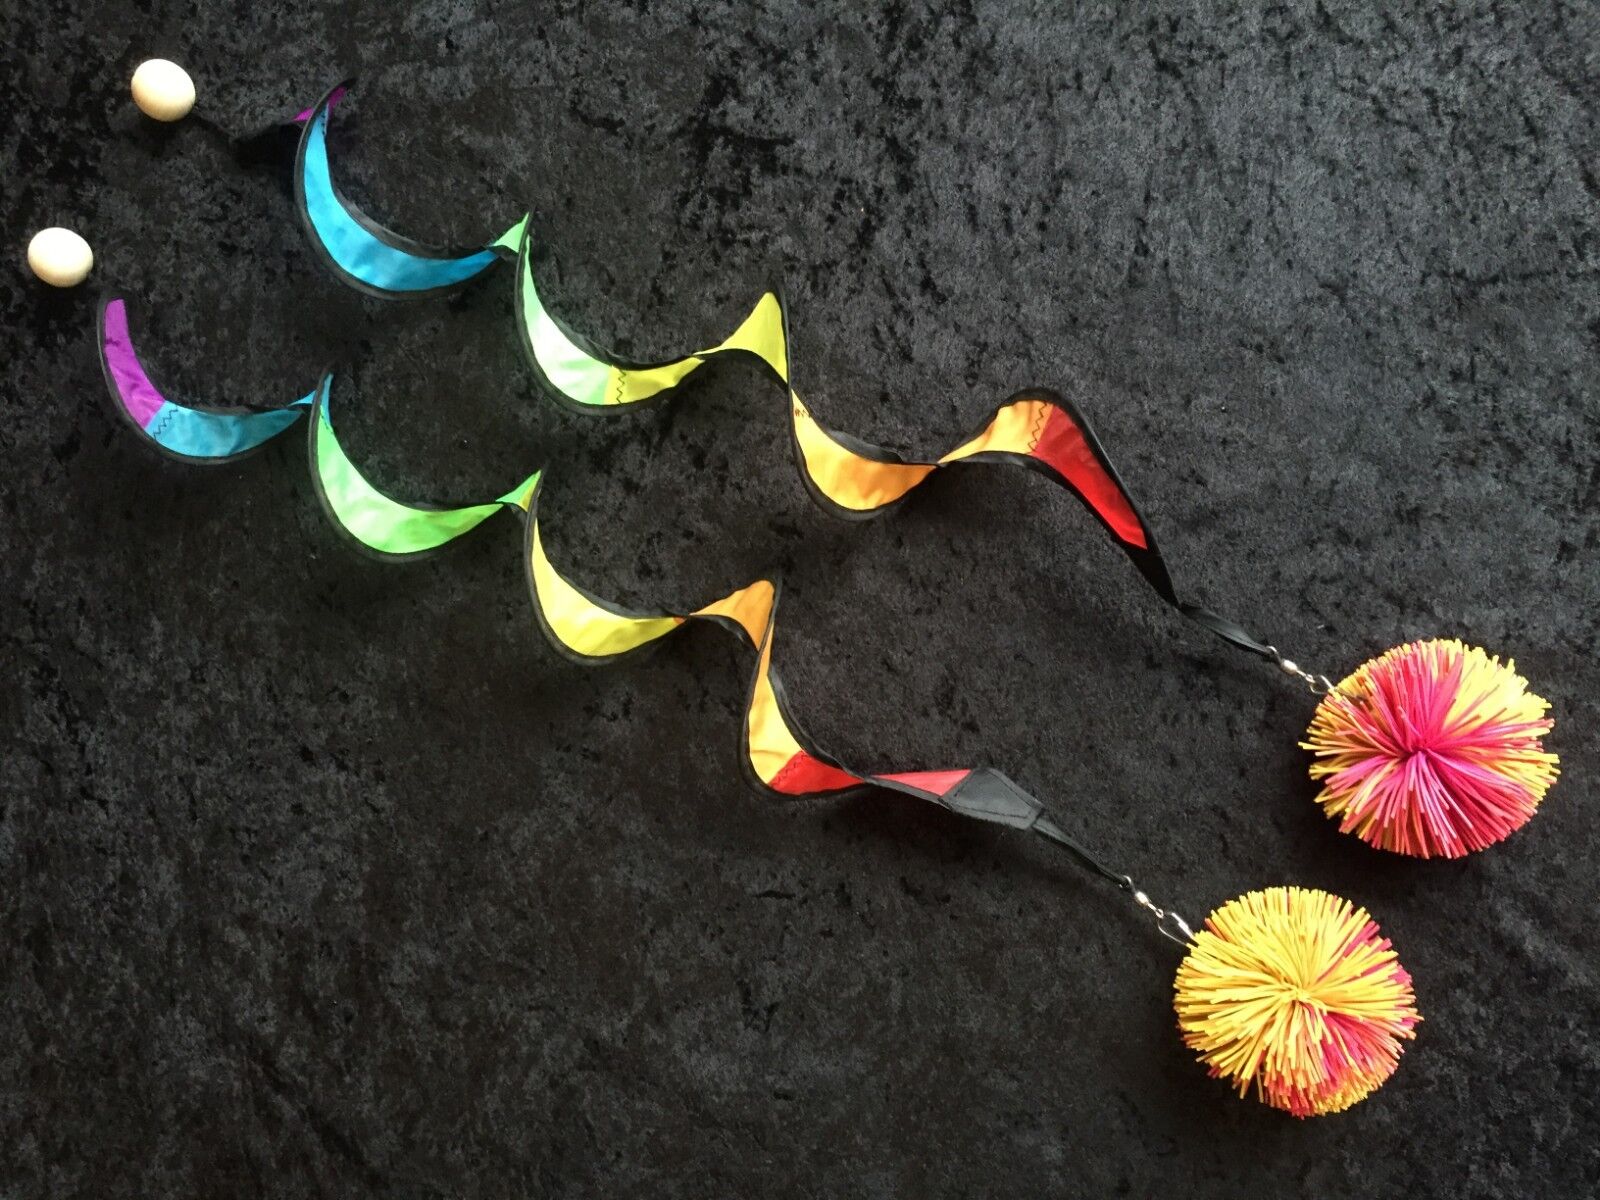 PoiPoi 'Rainbow Spiral Stringy Things' Poi Set with Soft Koosh Balls + Carry Bag